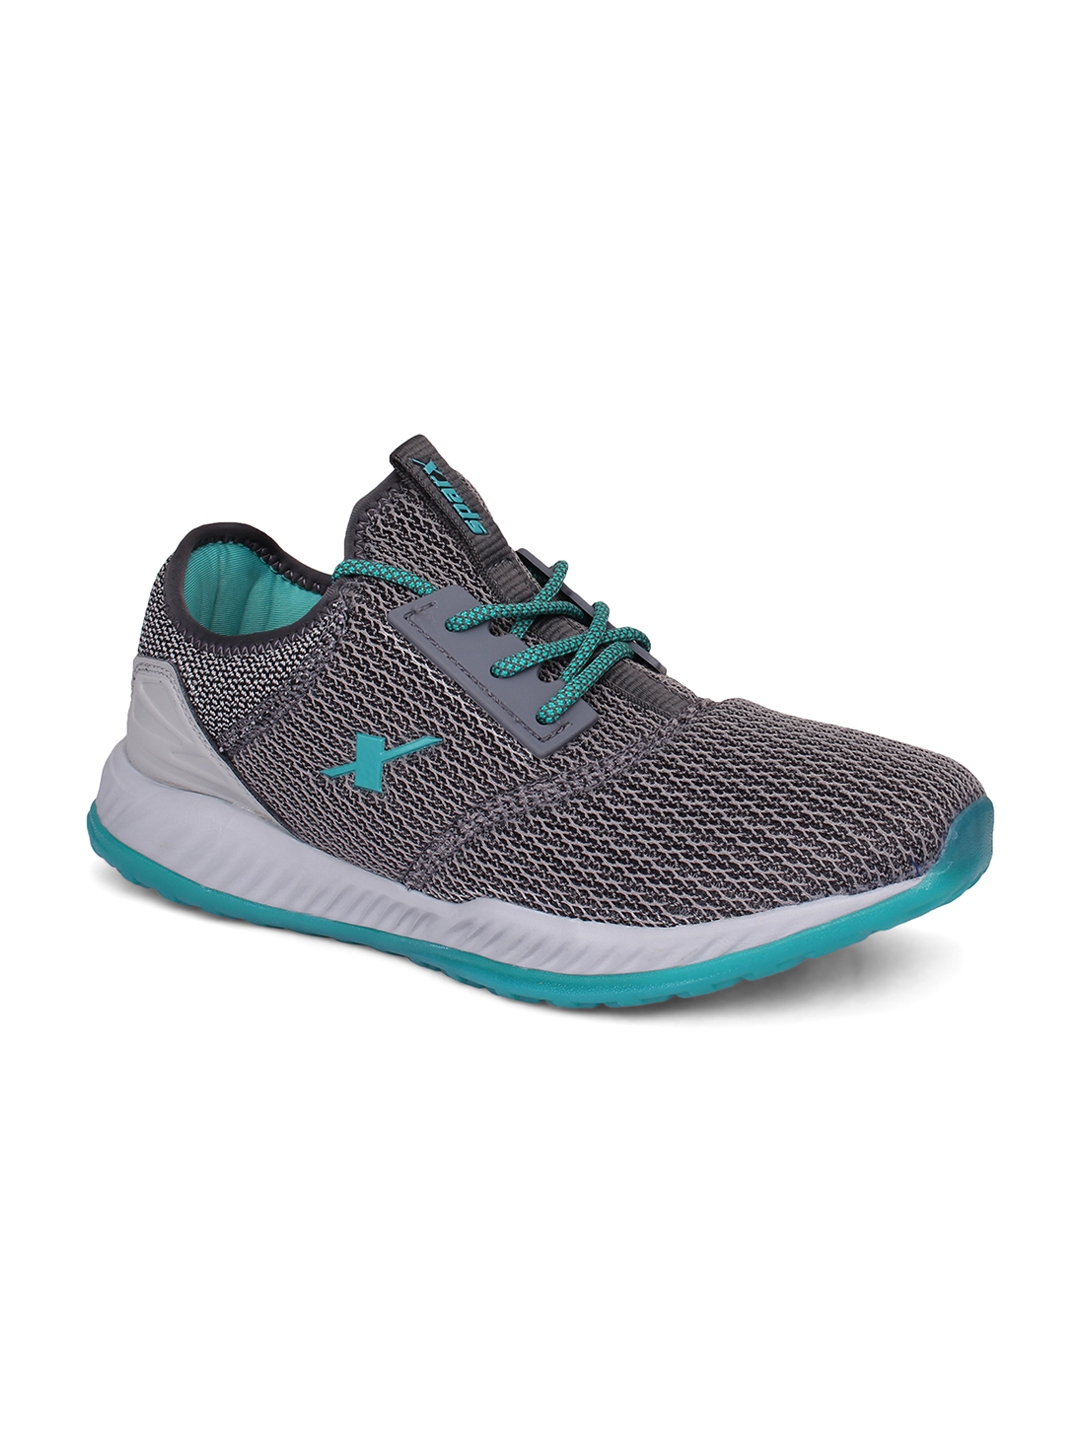 Buy Sparx Men Grey Running Shoes - Sports Shoes for Men 7307938 | Myntra